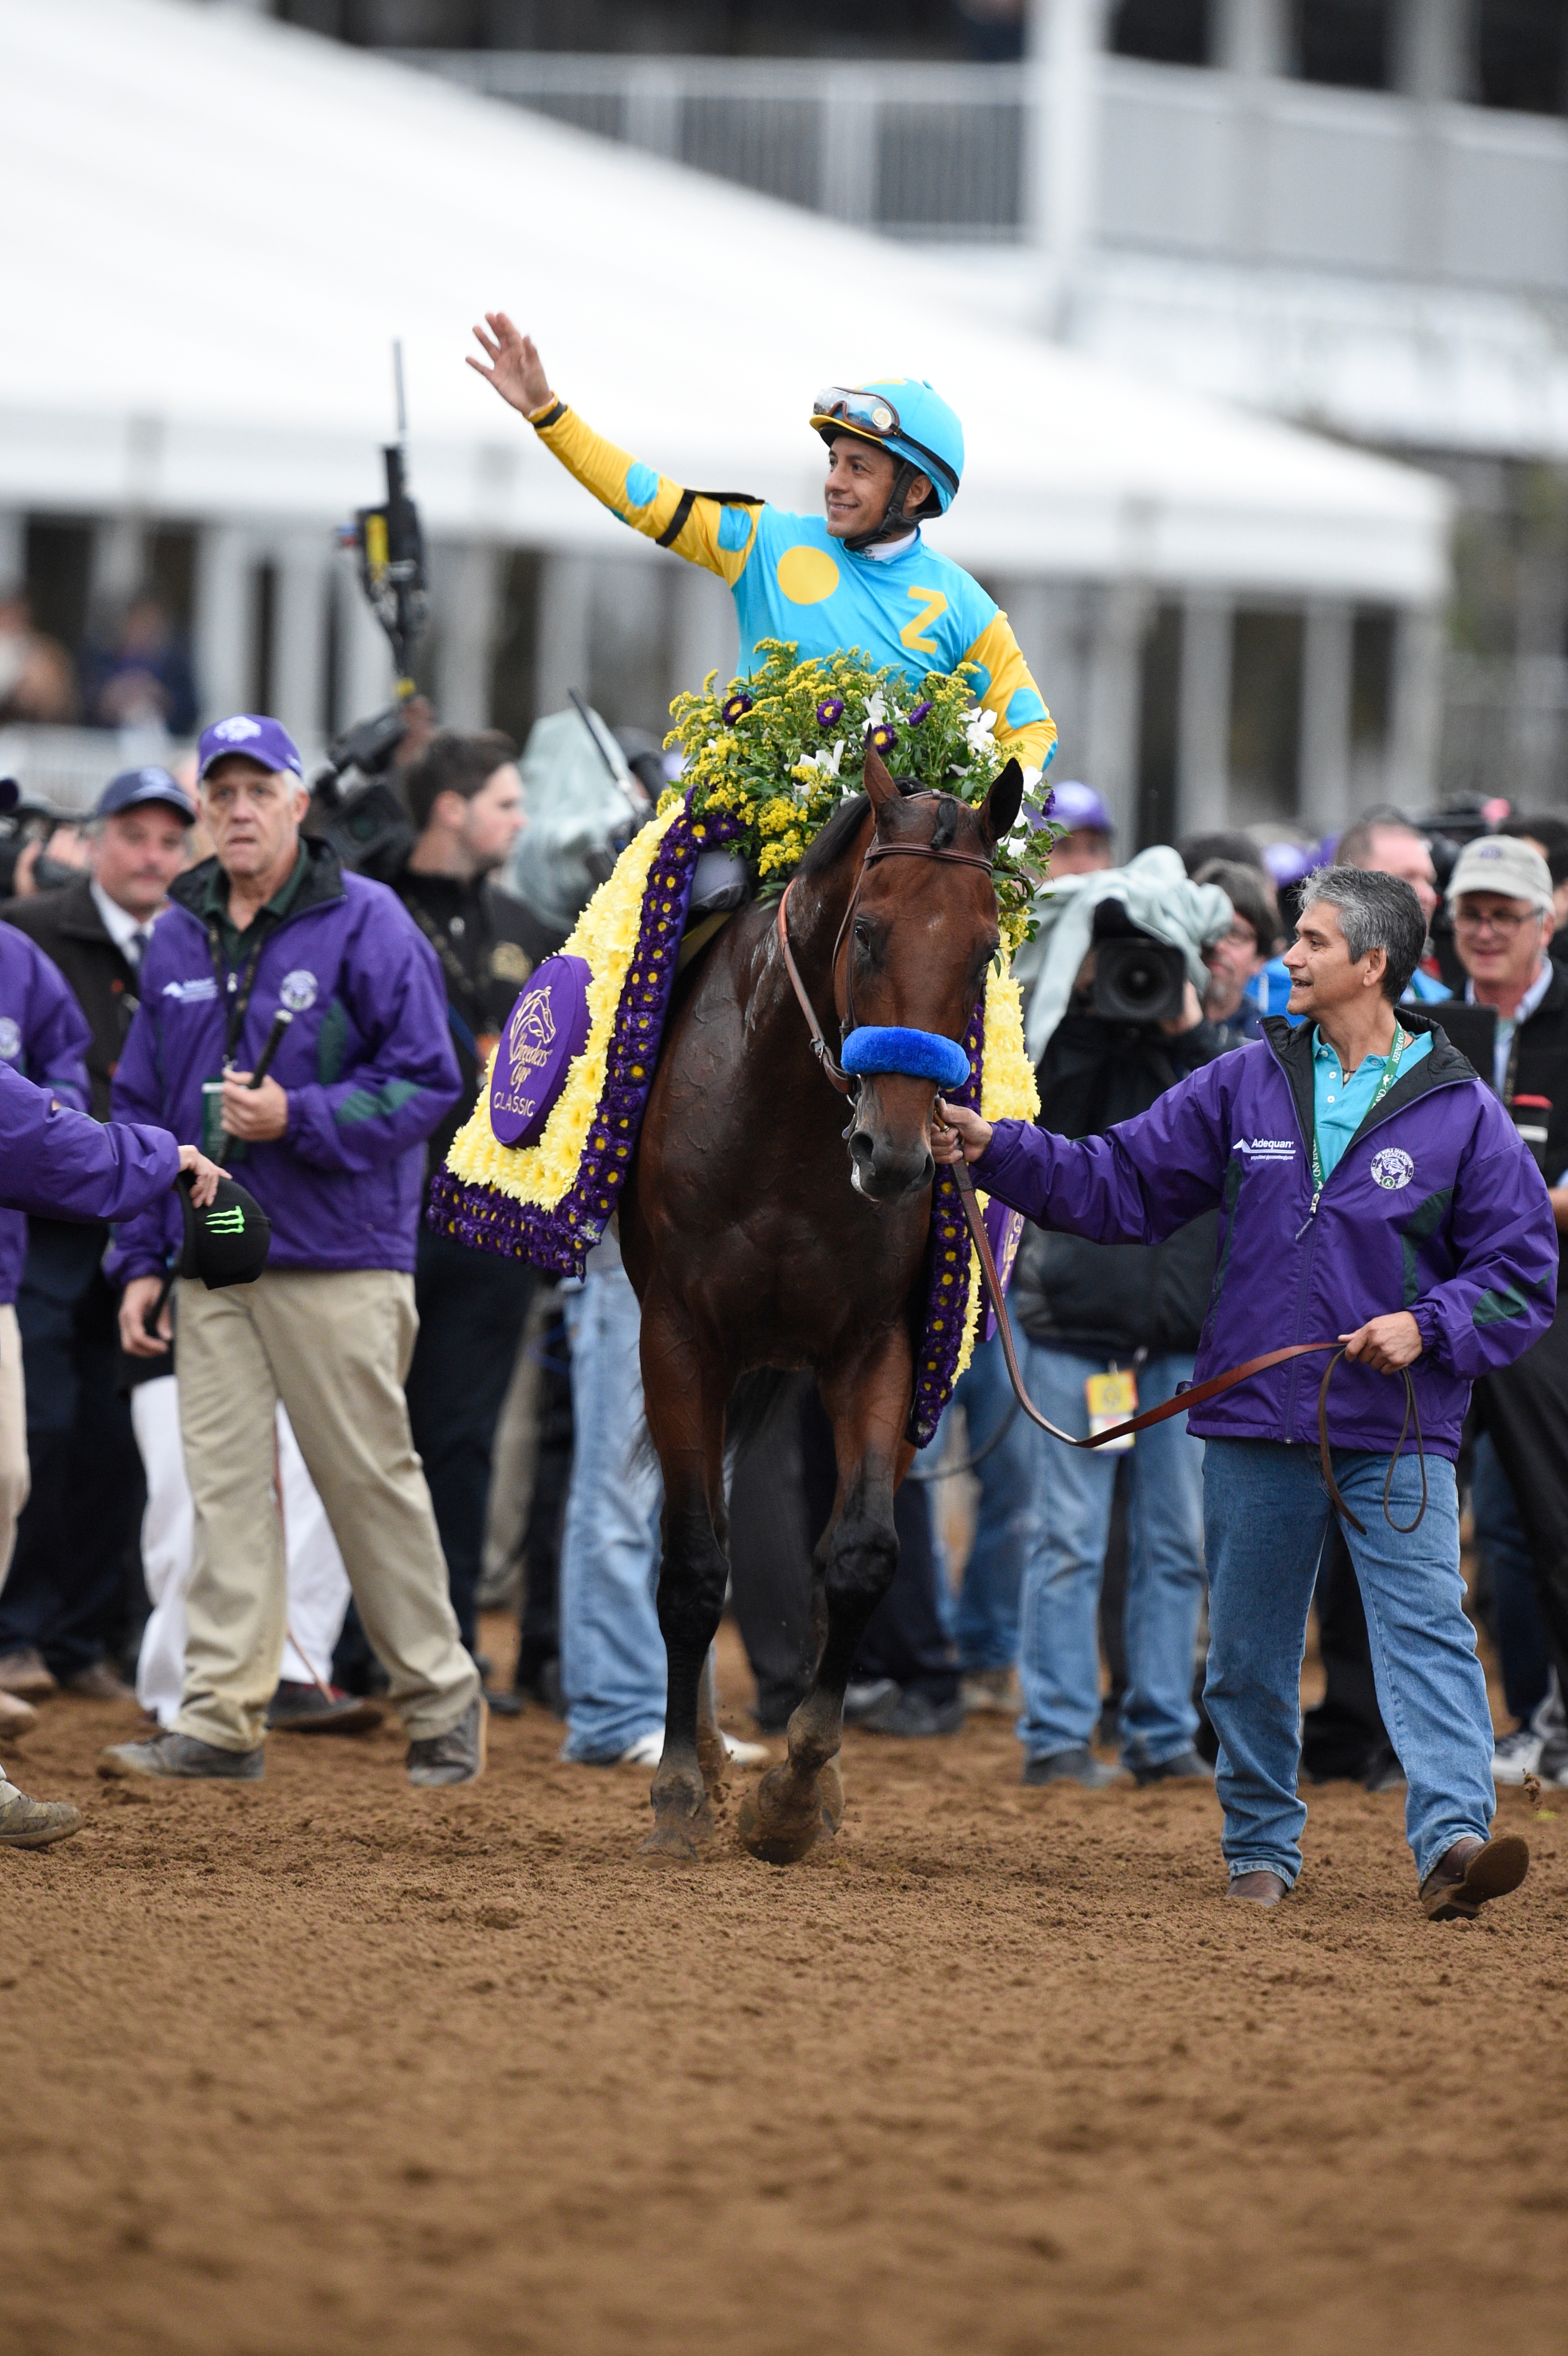 Victor Espinoza aboard American Pharoah at the 2015 Breeders' Cup at Keeneland (Breeders' Cup Photo)